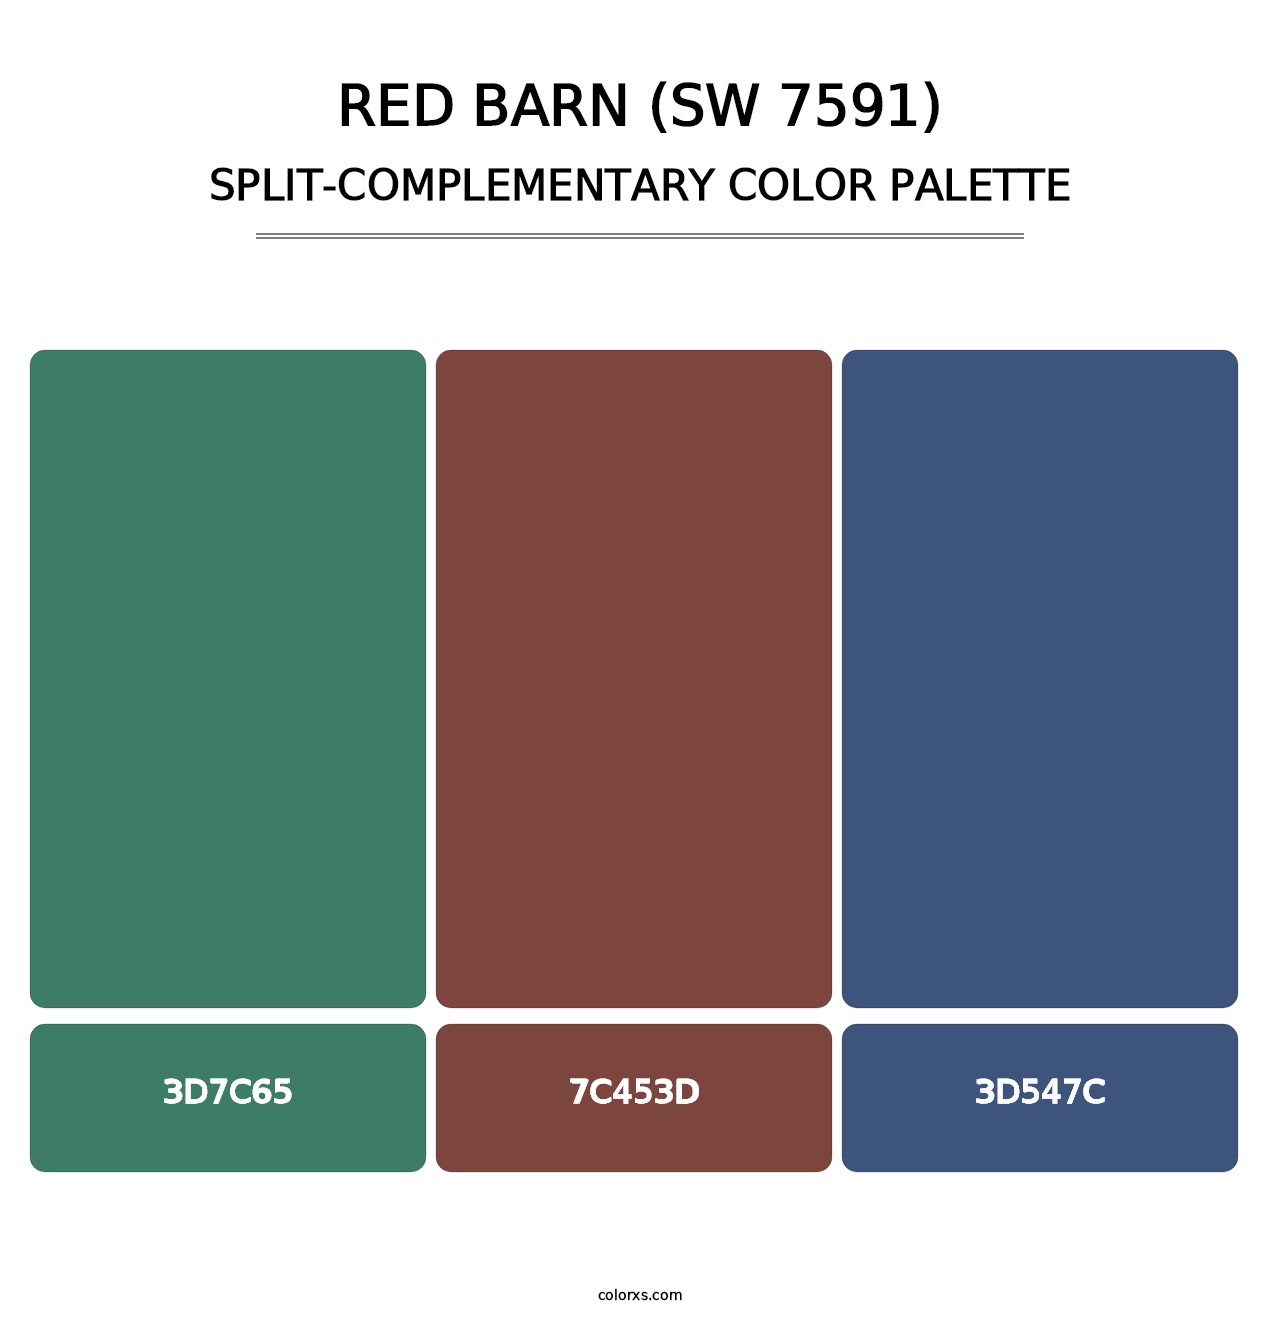 Red Barn (SW 7591) - Split-Complementary Color Palette